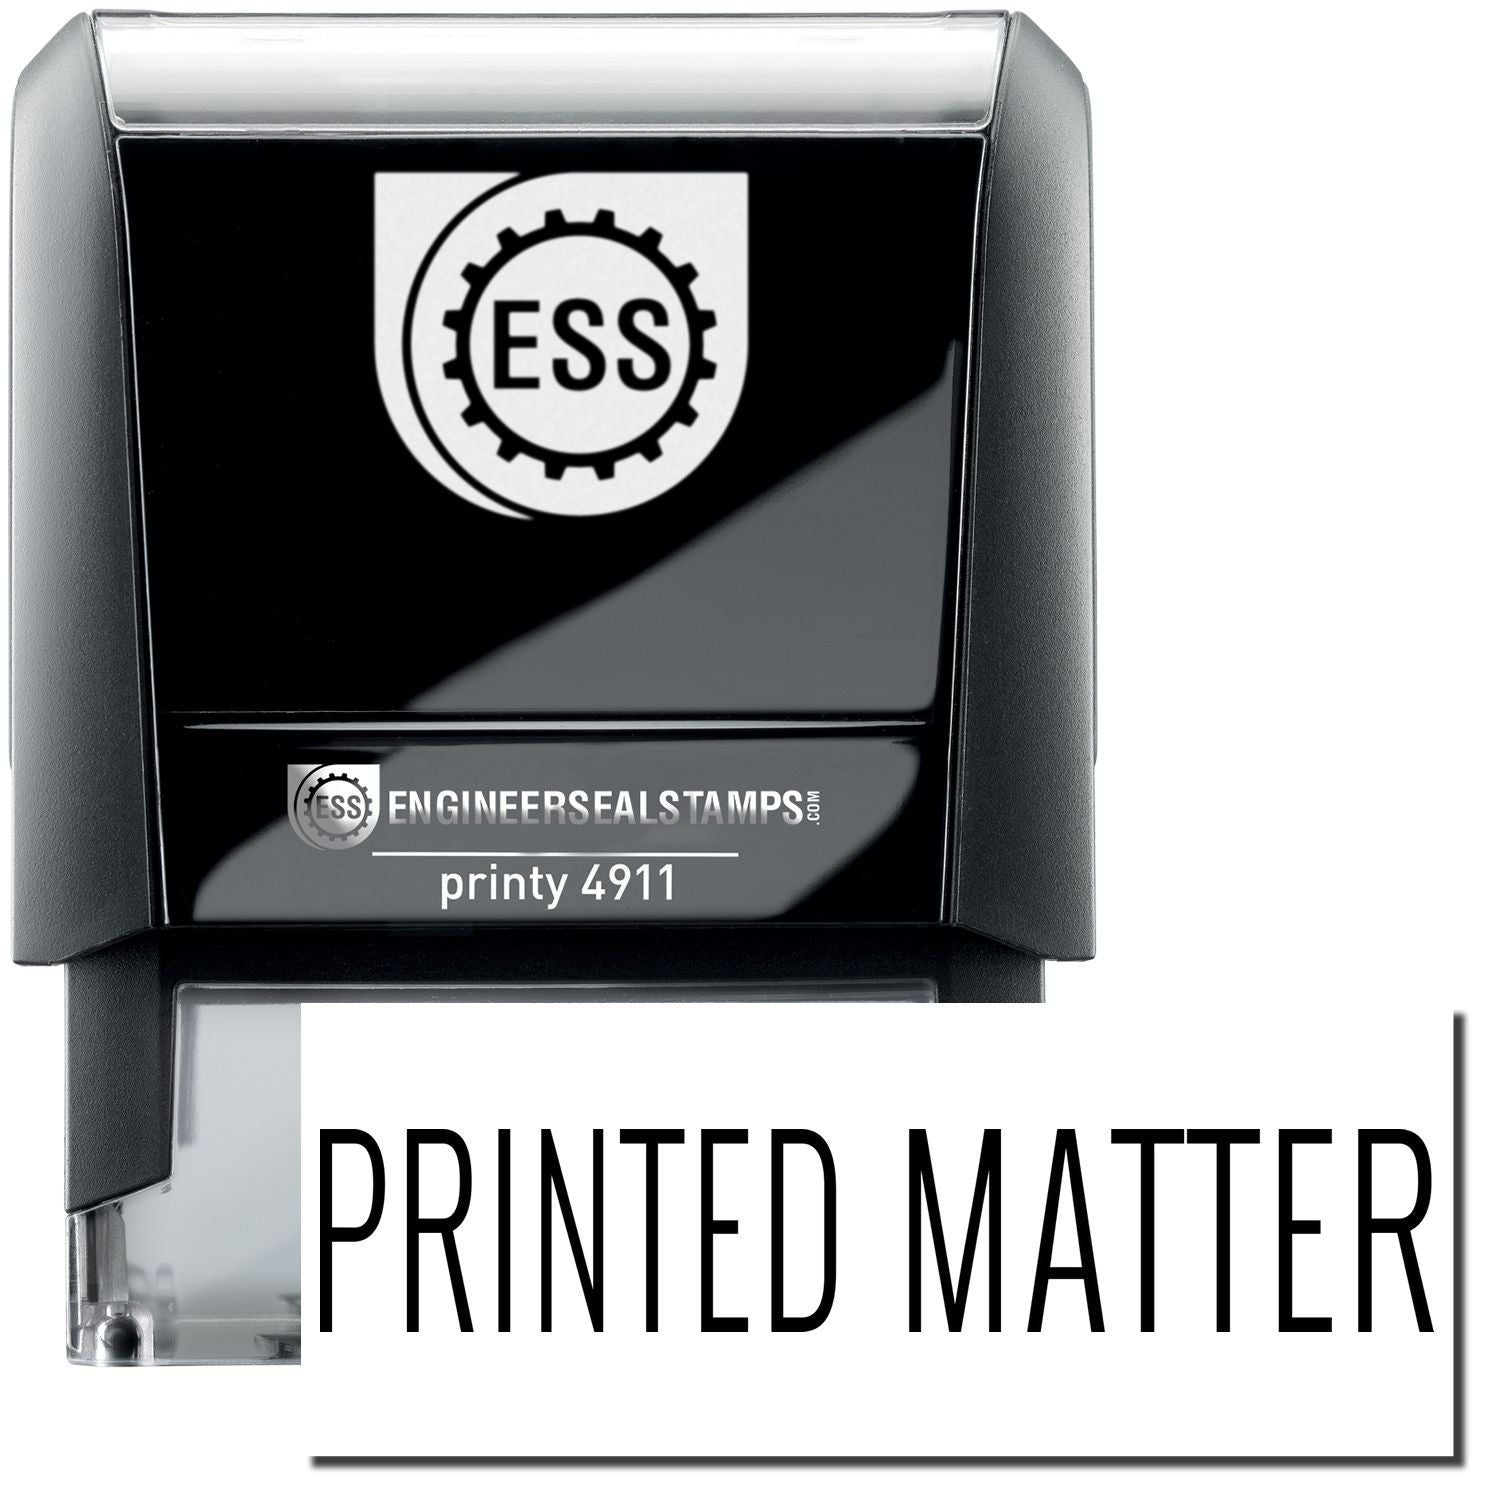 A self-inking stamp with a stamped image showing how the text "PRINTED MATTER" is displayed after stamping.